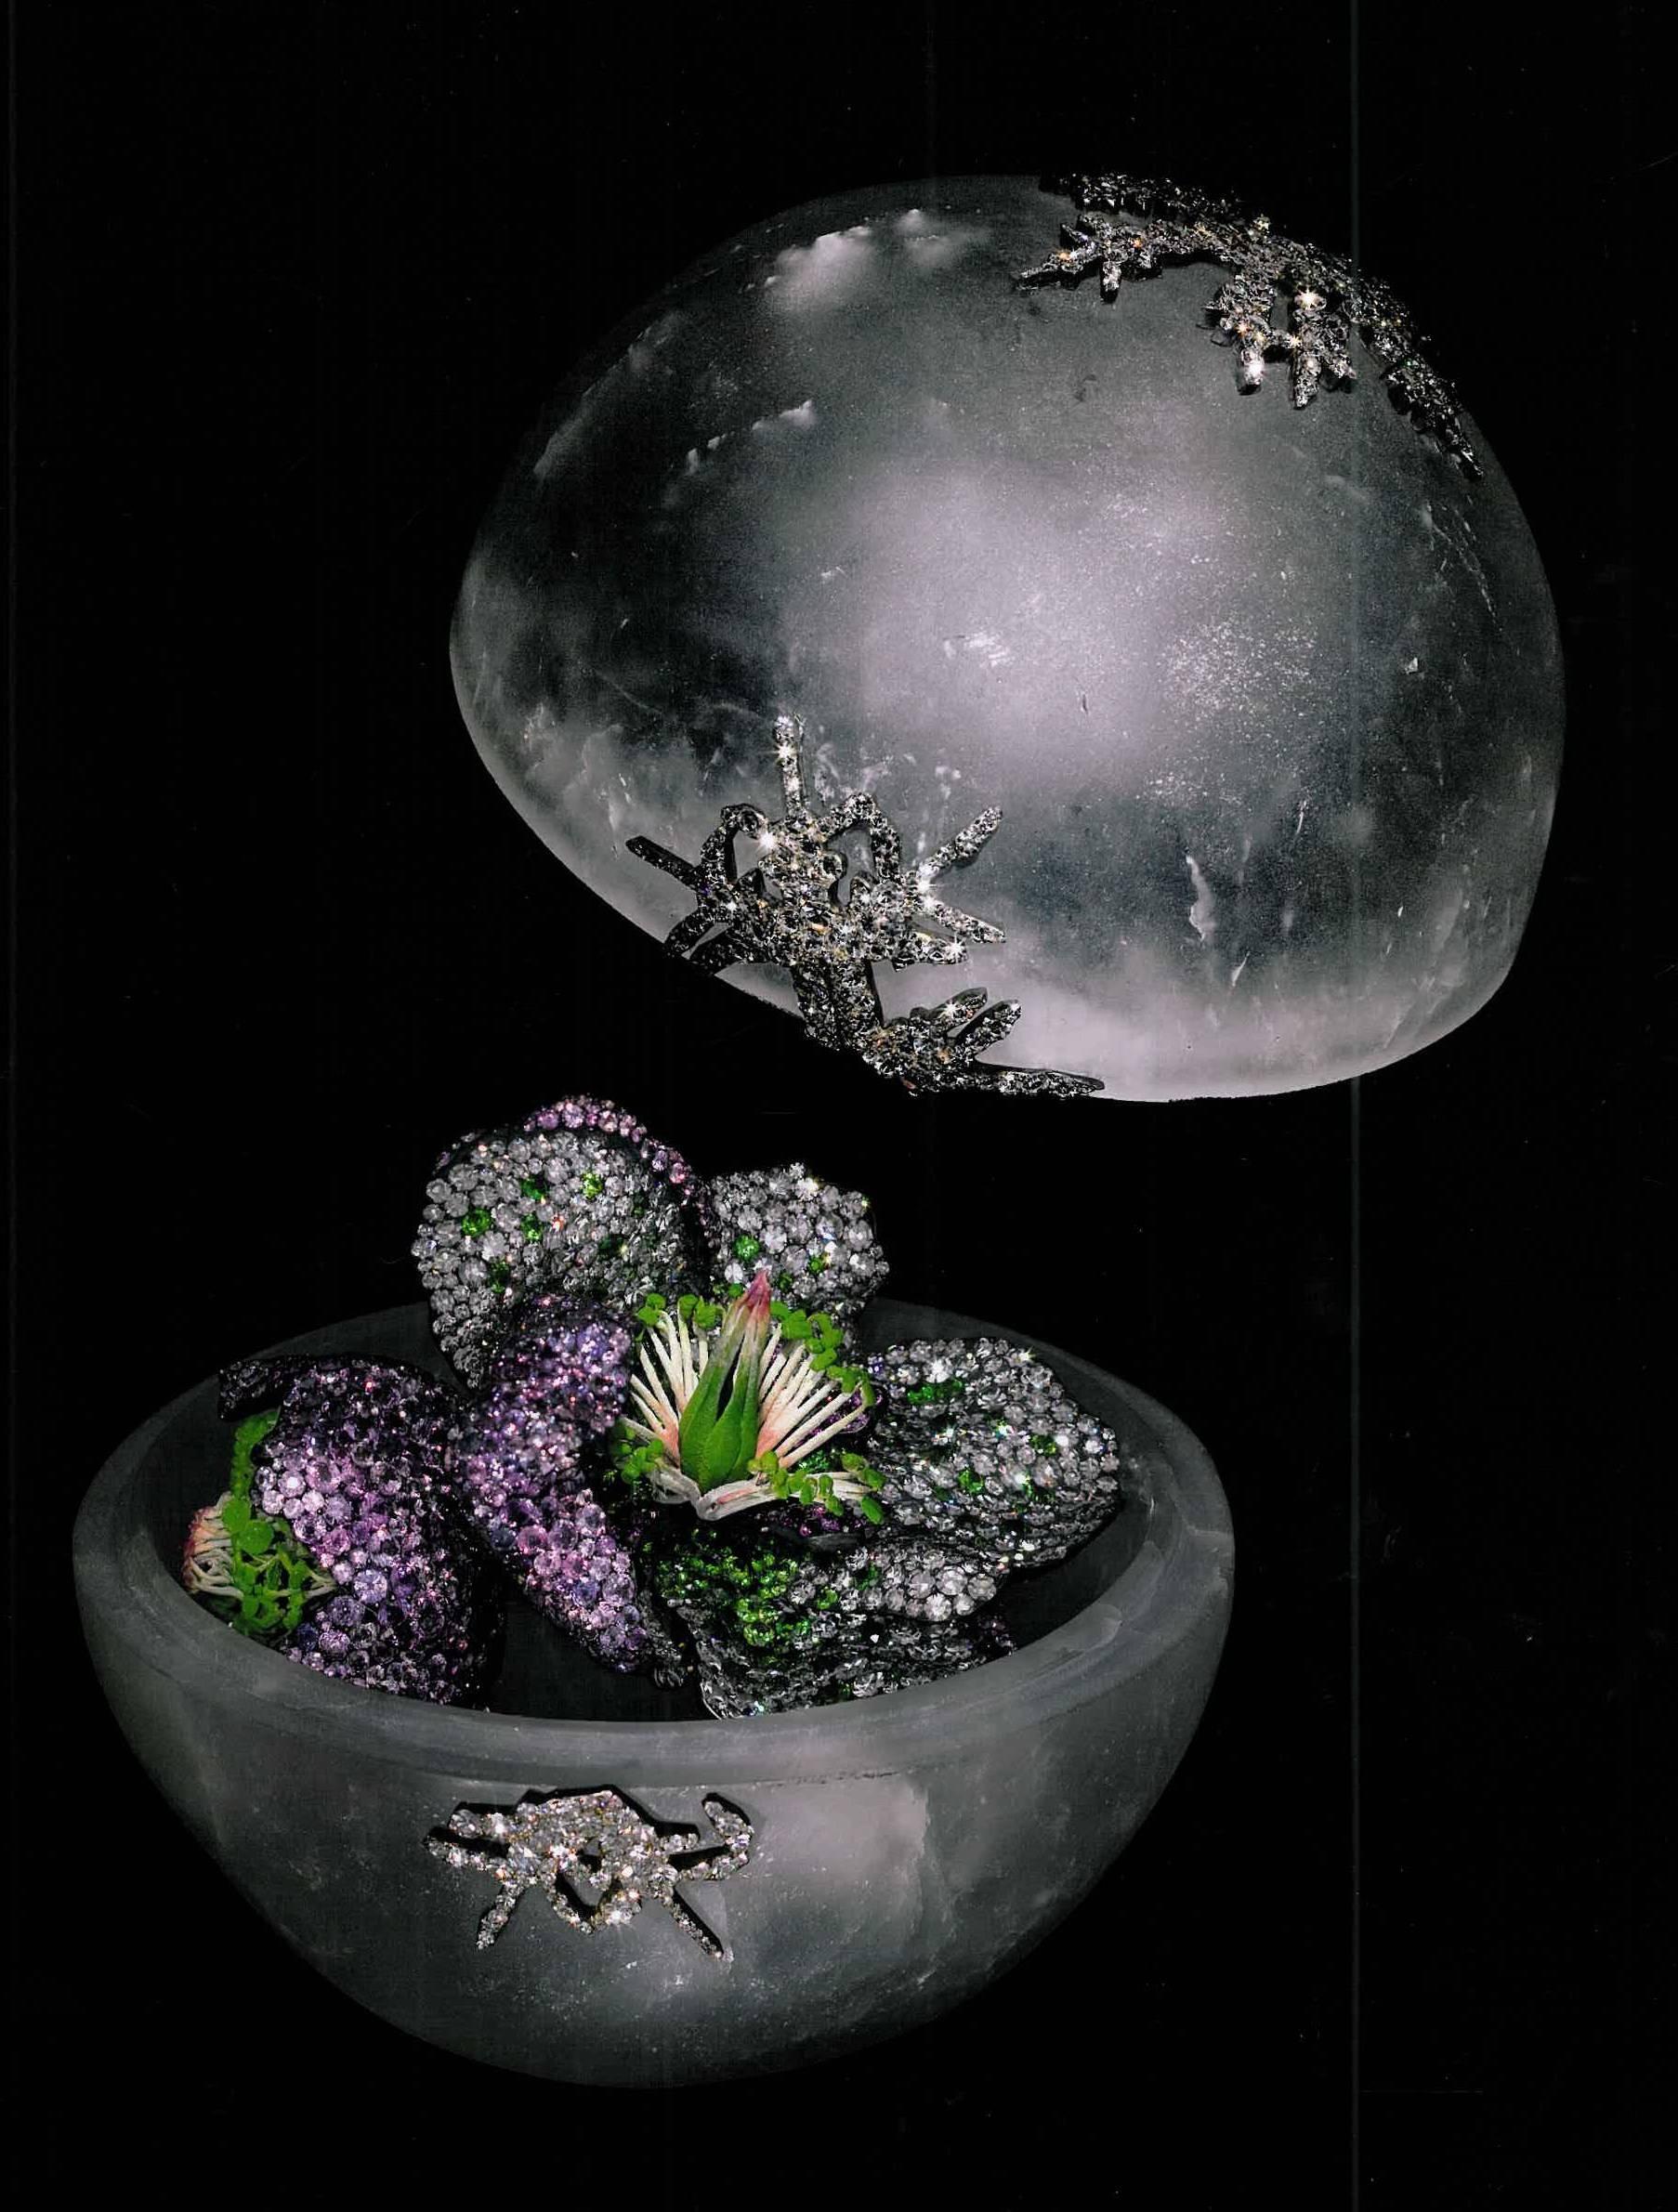 This is the second volume of the work of JAR Paris - Joel Arthur Rosenthal, who is one of the most important and sought after jewellers of the late twentieth and twenty first centuries. This book brings the catalogue raisonne of his work up to date